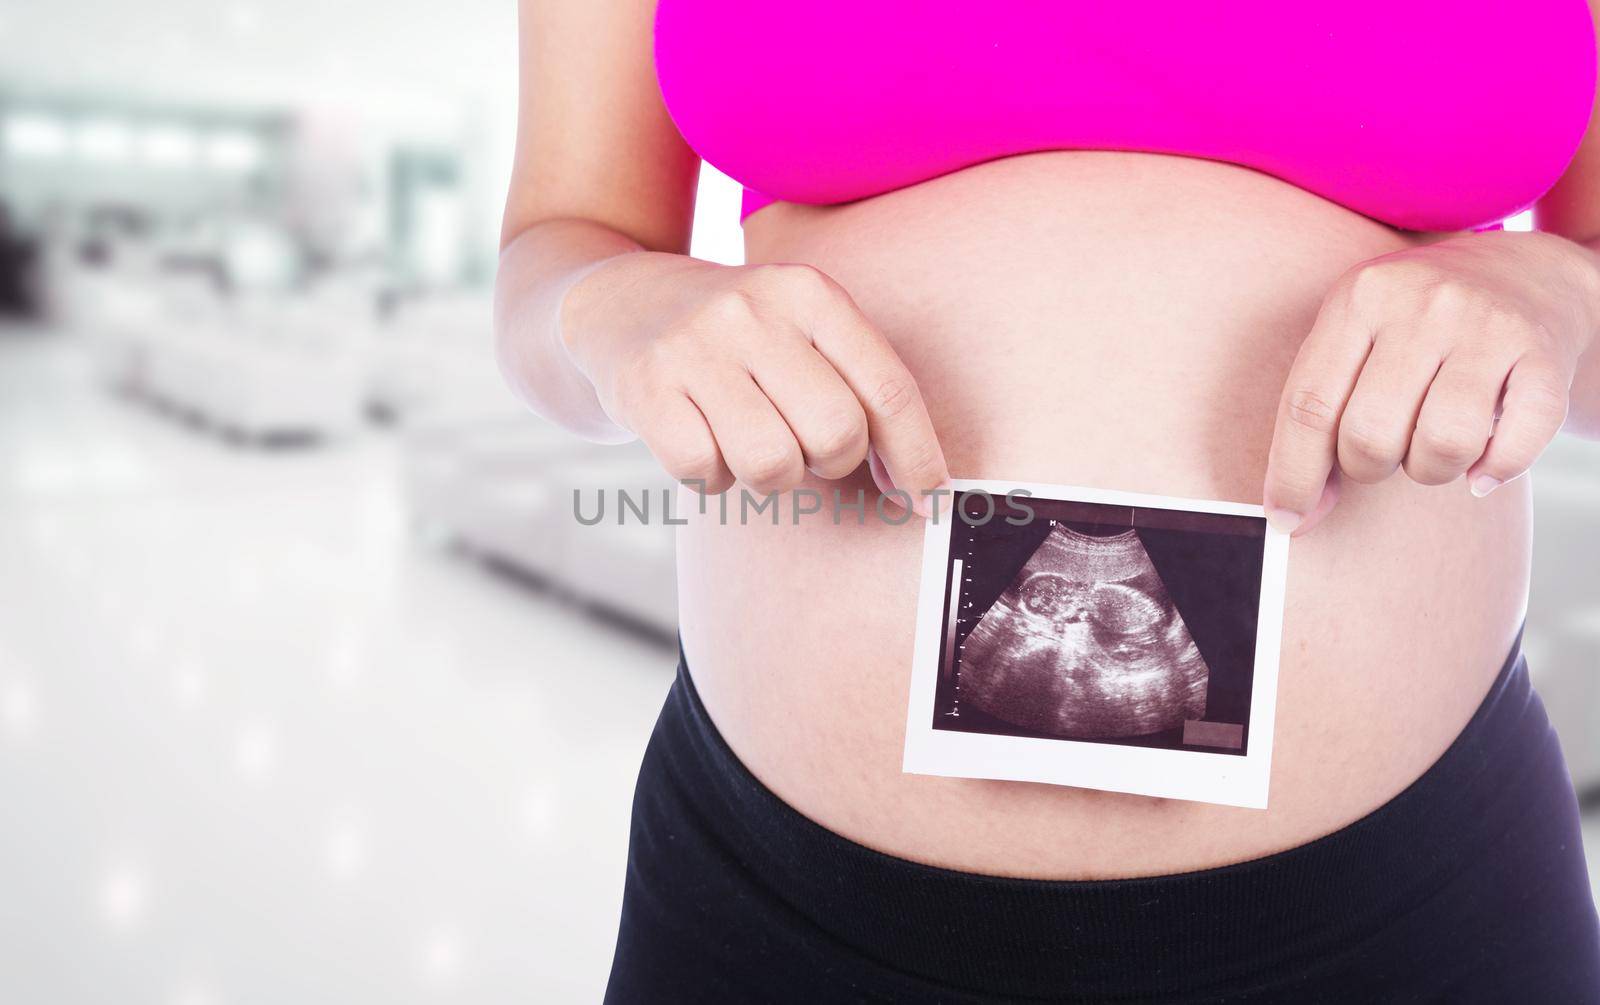 Pregnant woman hands holding ultrasound photo isolated in hospital background